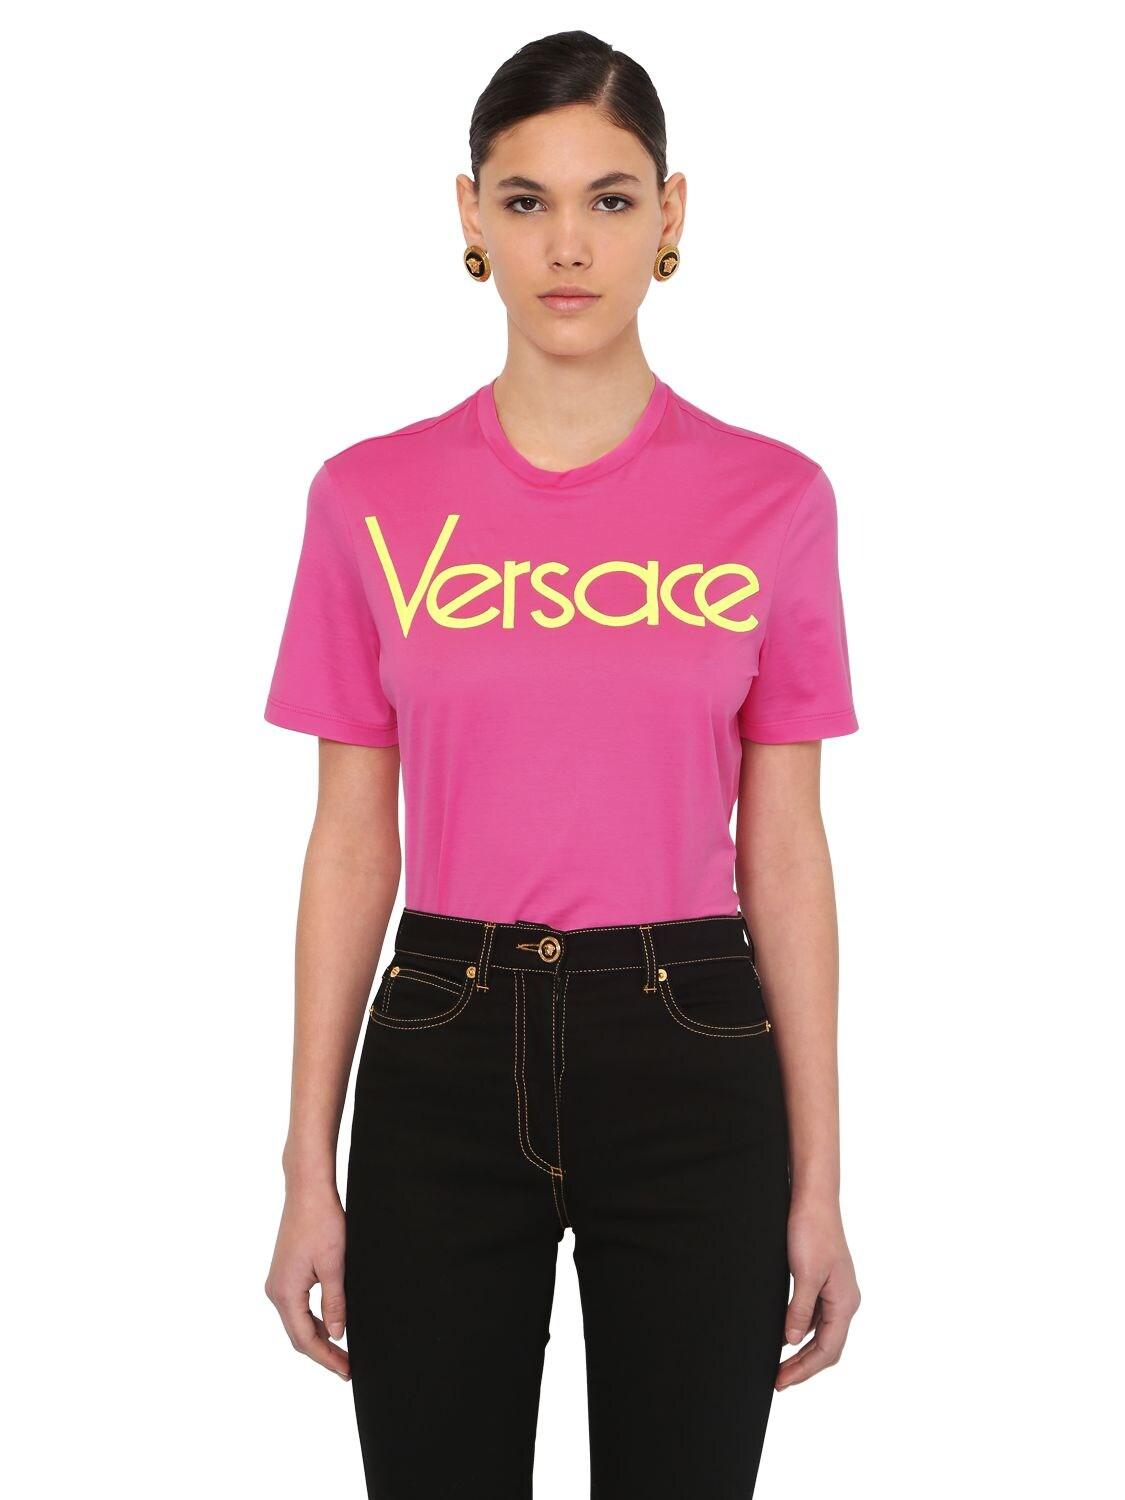 Versace Fuchsia Cotton T-shirt in Pink - Save 65% - Lyst